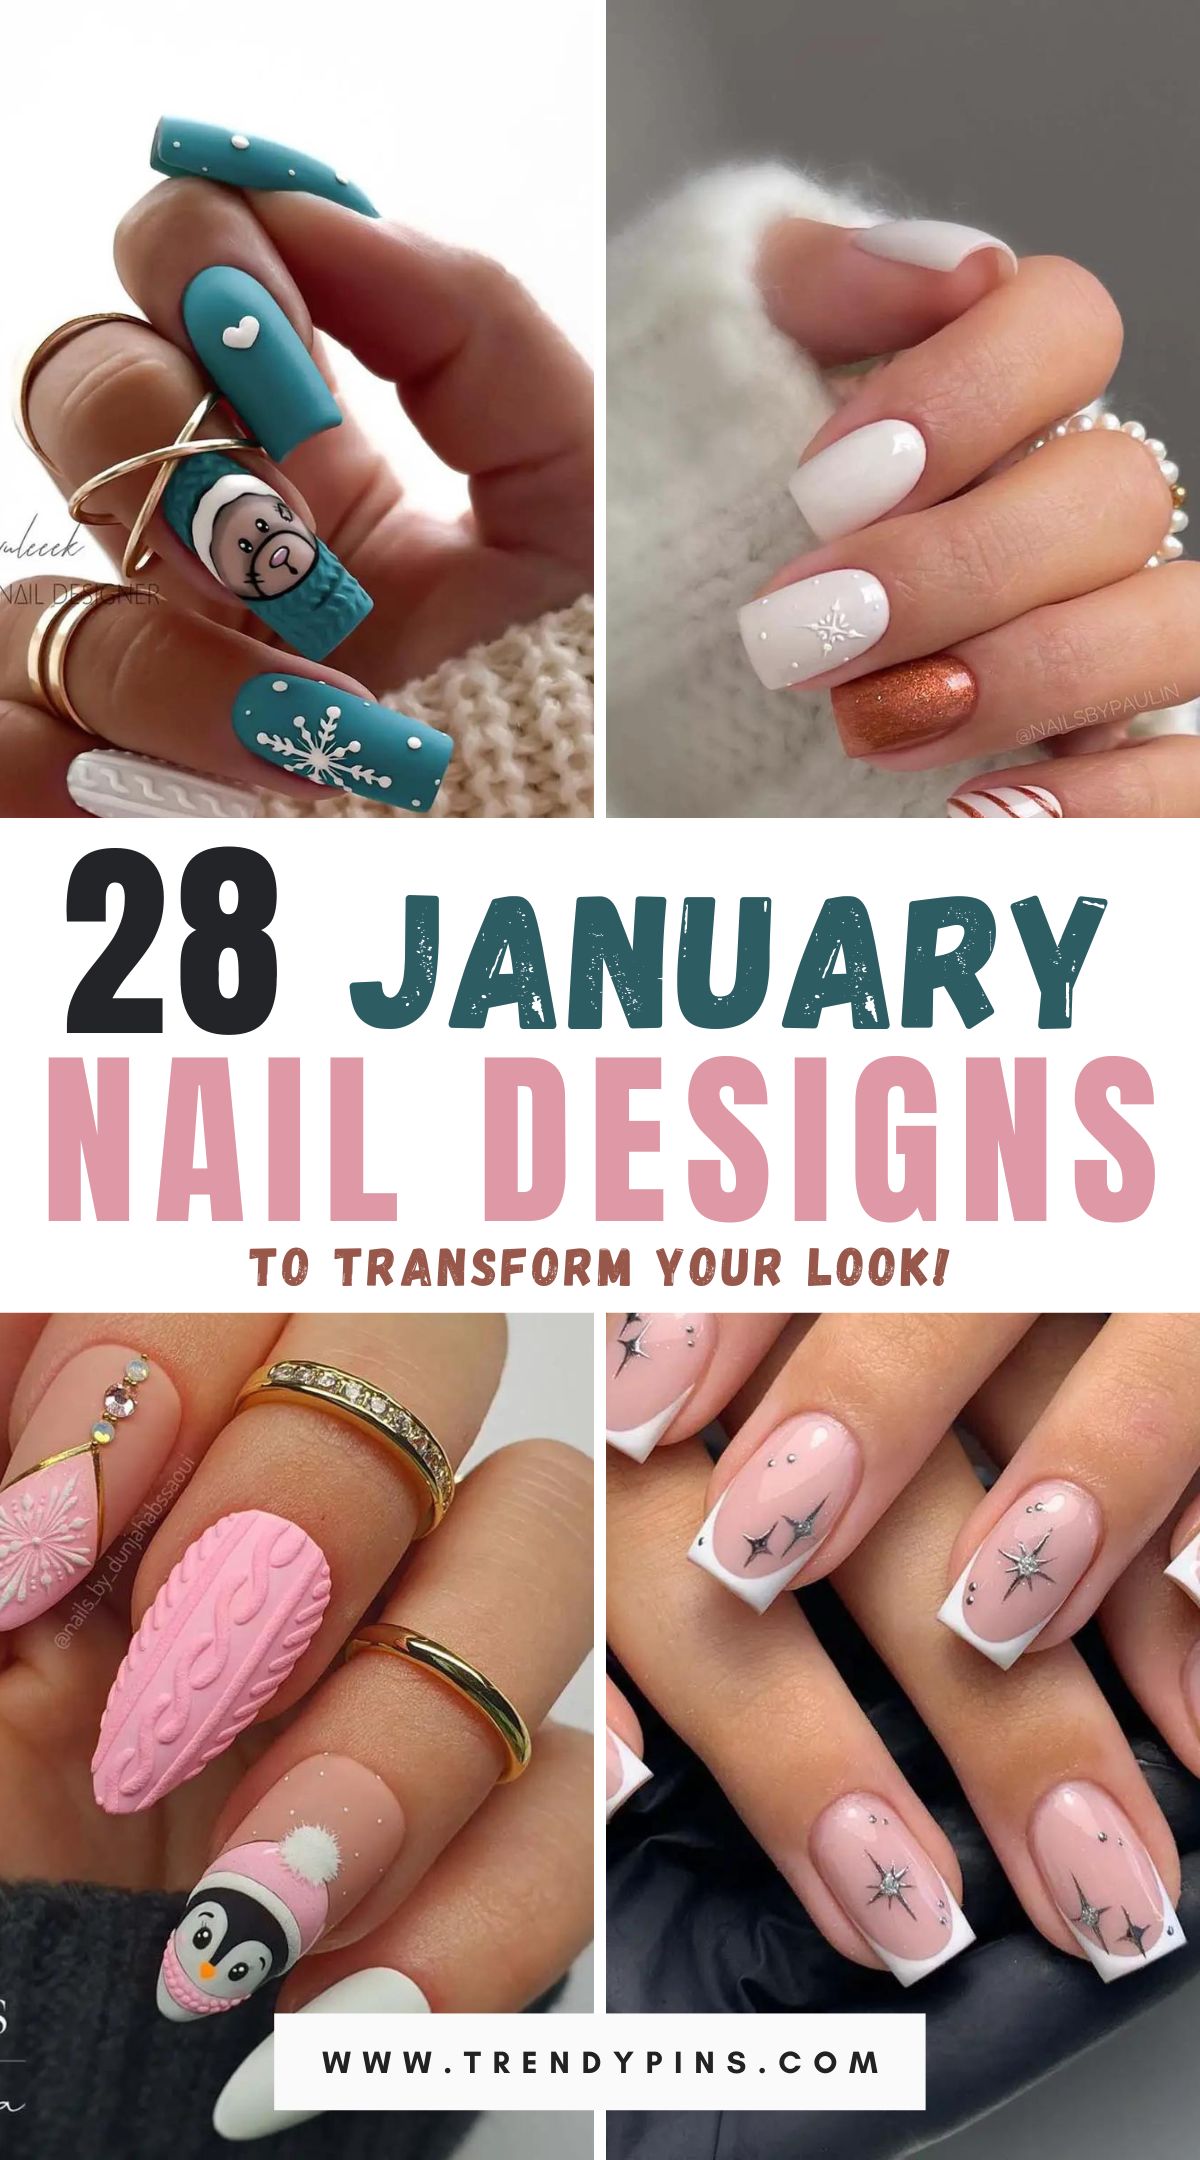 Explore our handpicked selection of the best 28 January nail designs to inspire your next manicure. Elevate your style and stay on-trend this month with these stunning nail art ideas.